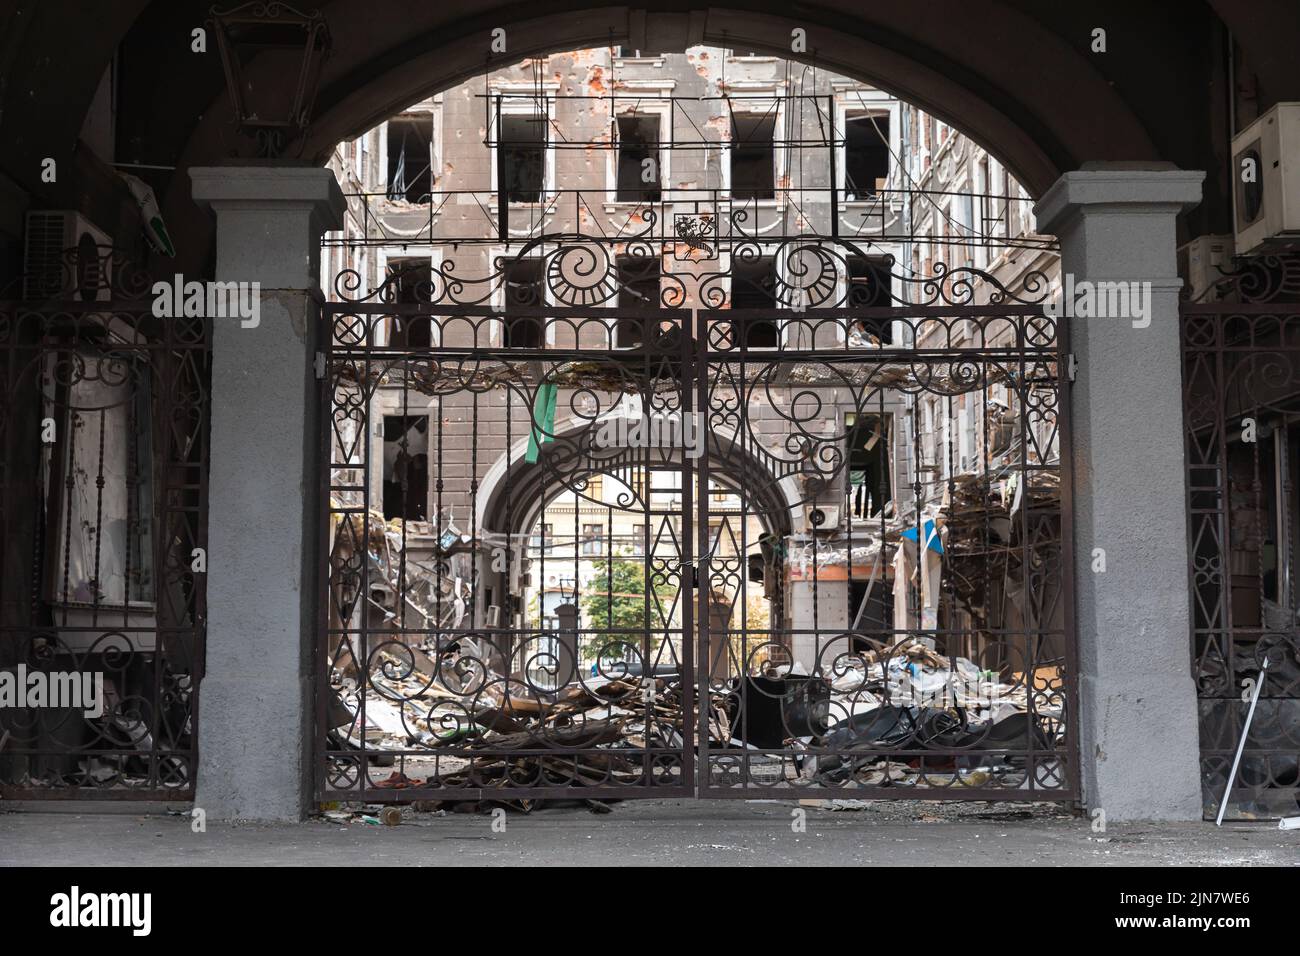 A decorative wrought-iron fence in the courtyard of the damaged building. Destroyed building in historical downtown in Kharkiv, Ukraine - 1 Aug 2022 Stock Photo